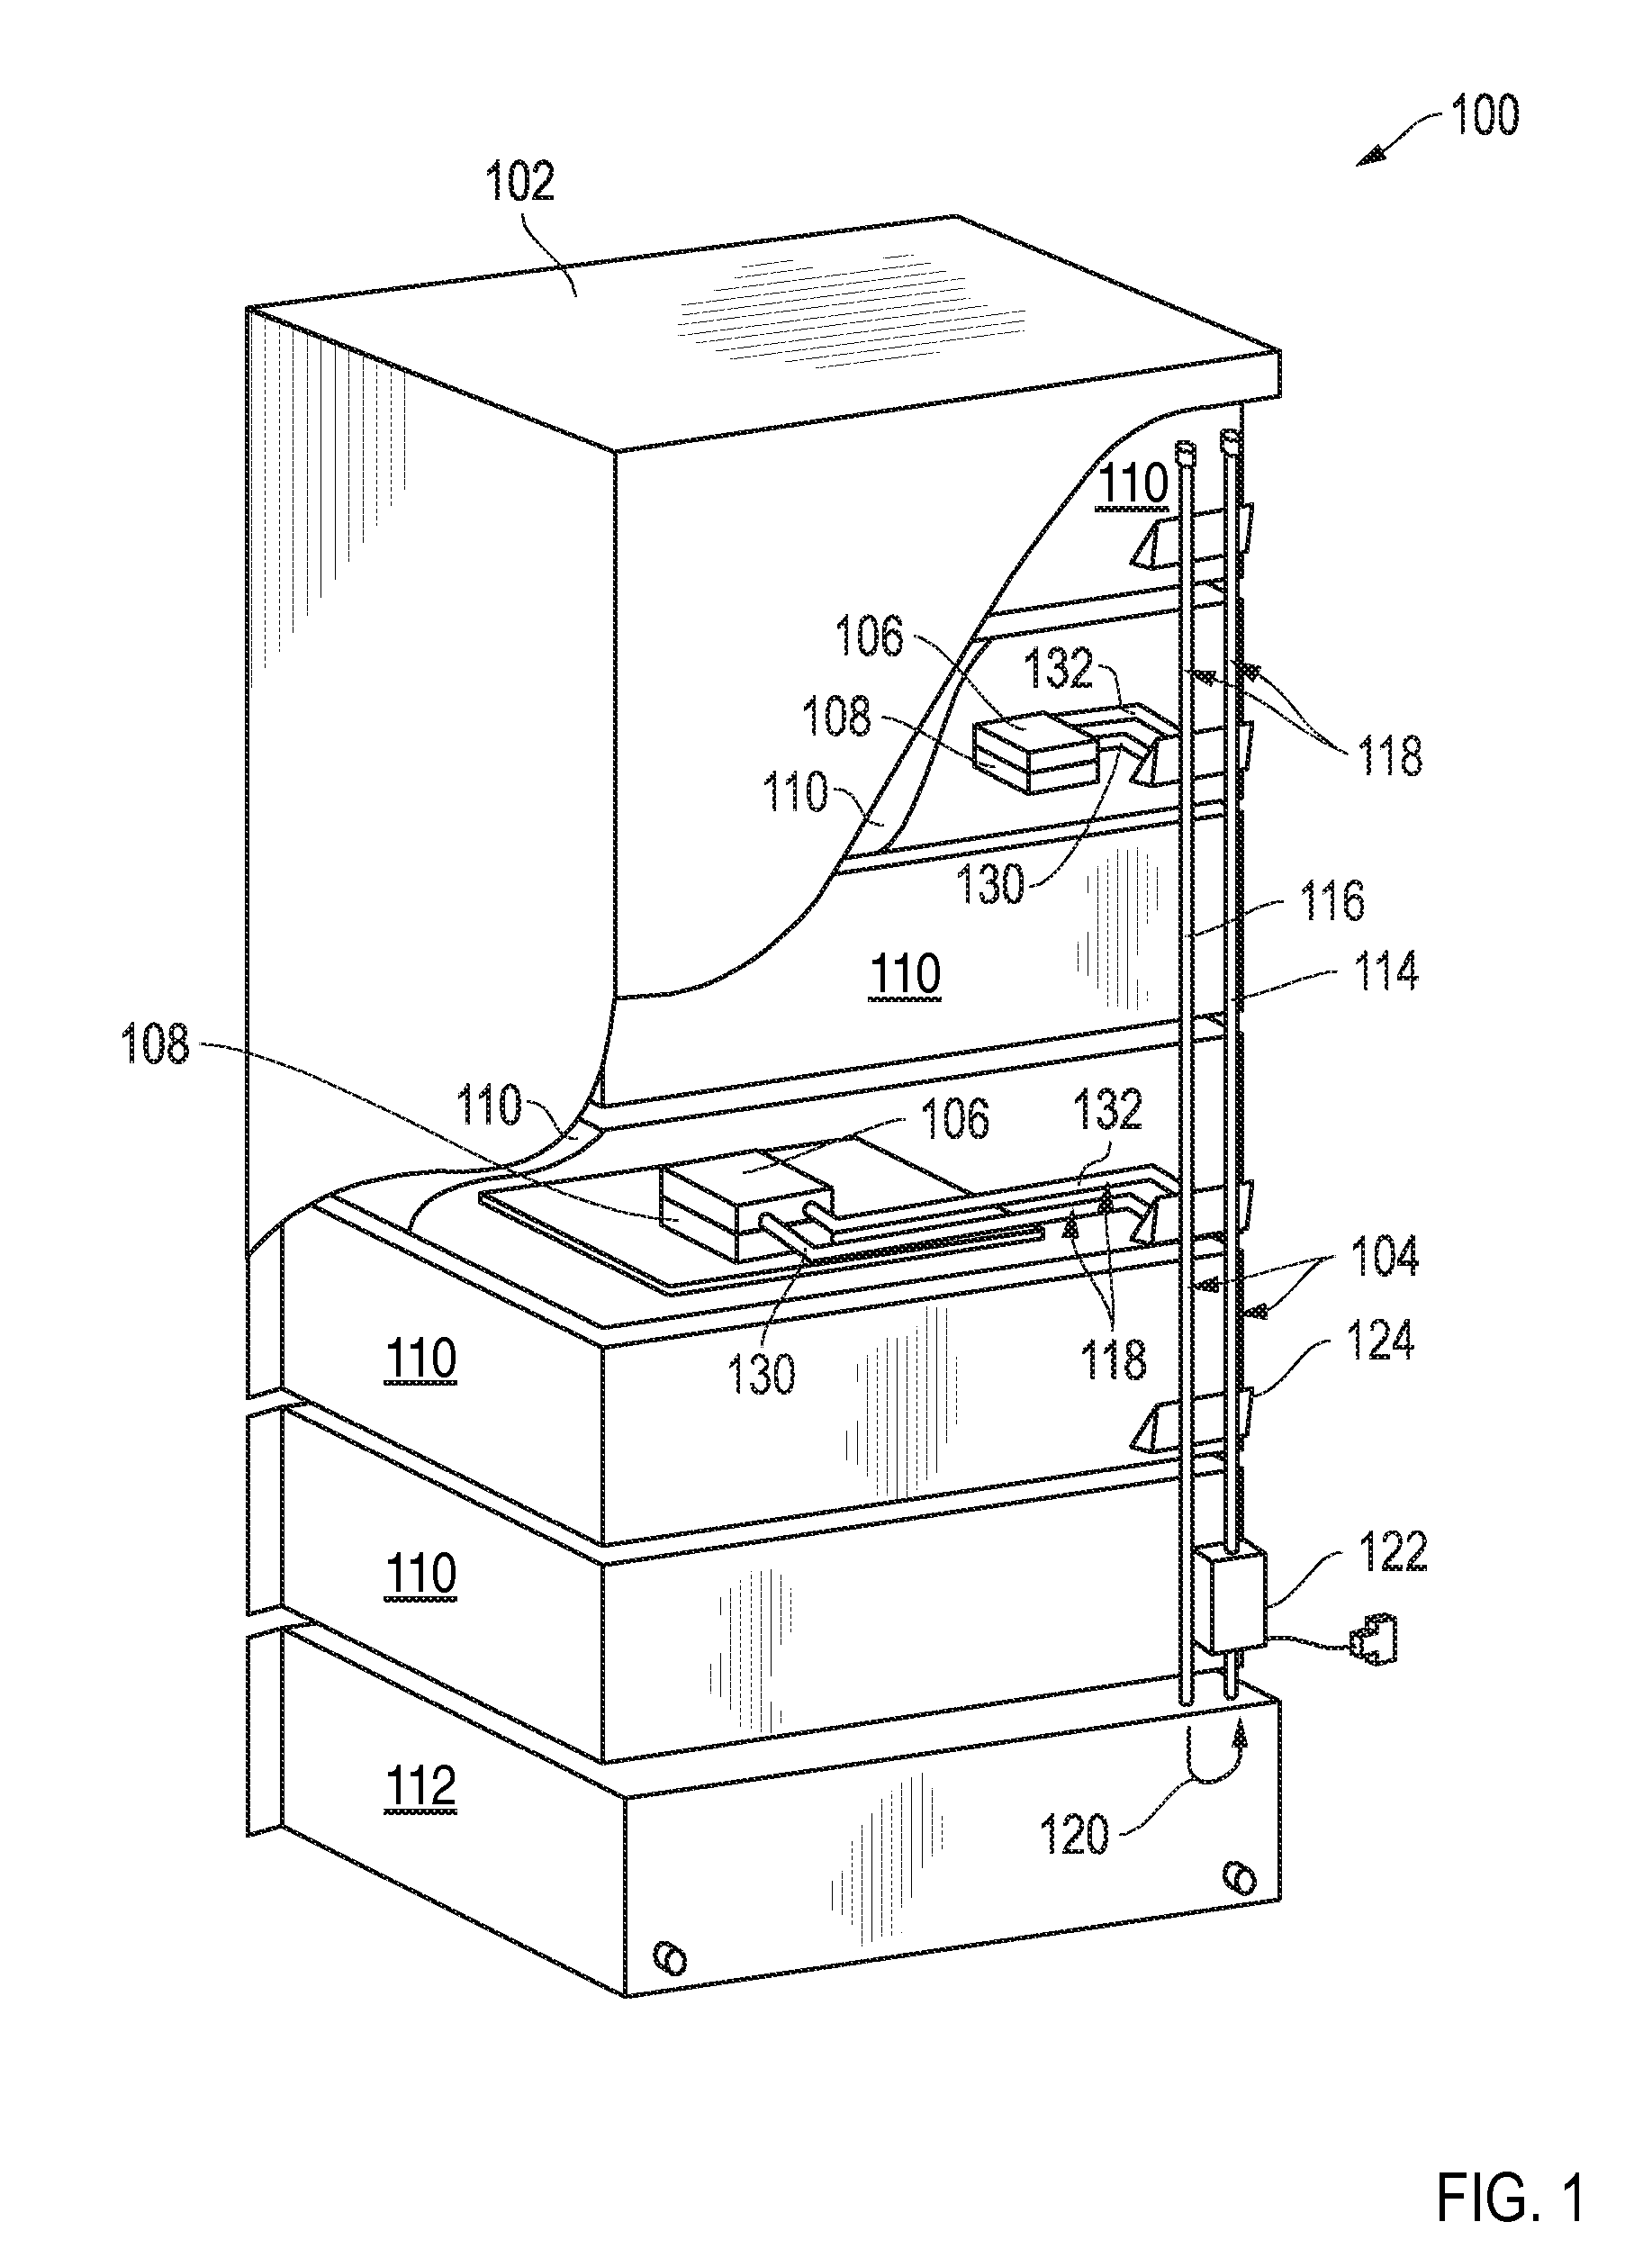 Heat Transfer Systems for Dissipating Thermal Loads From a Computer Rack